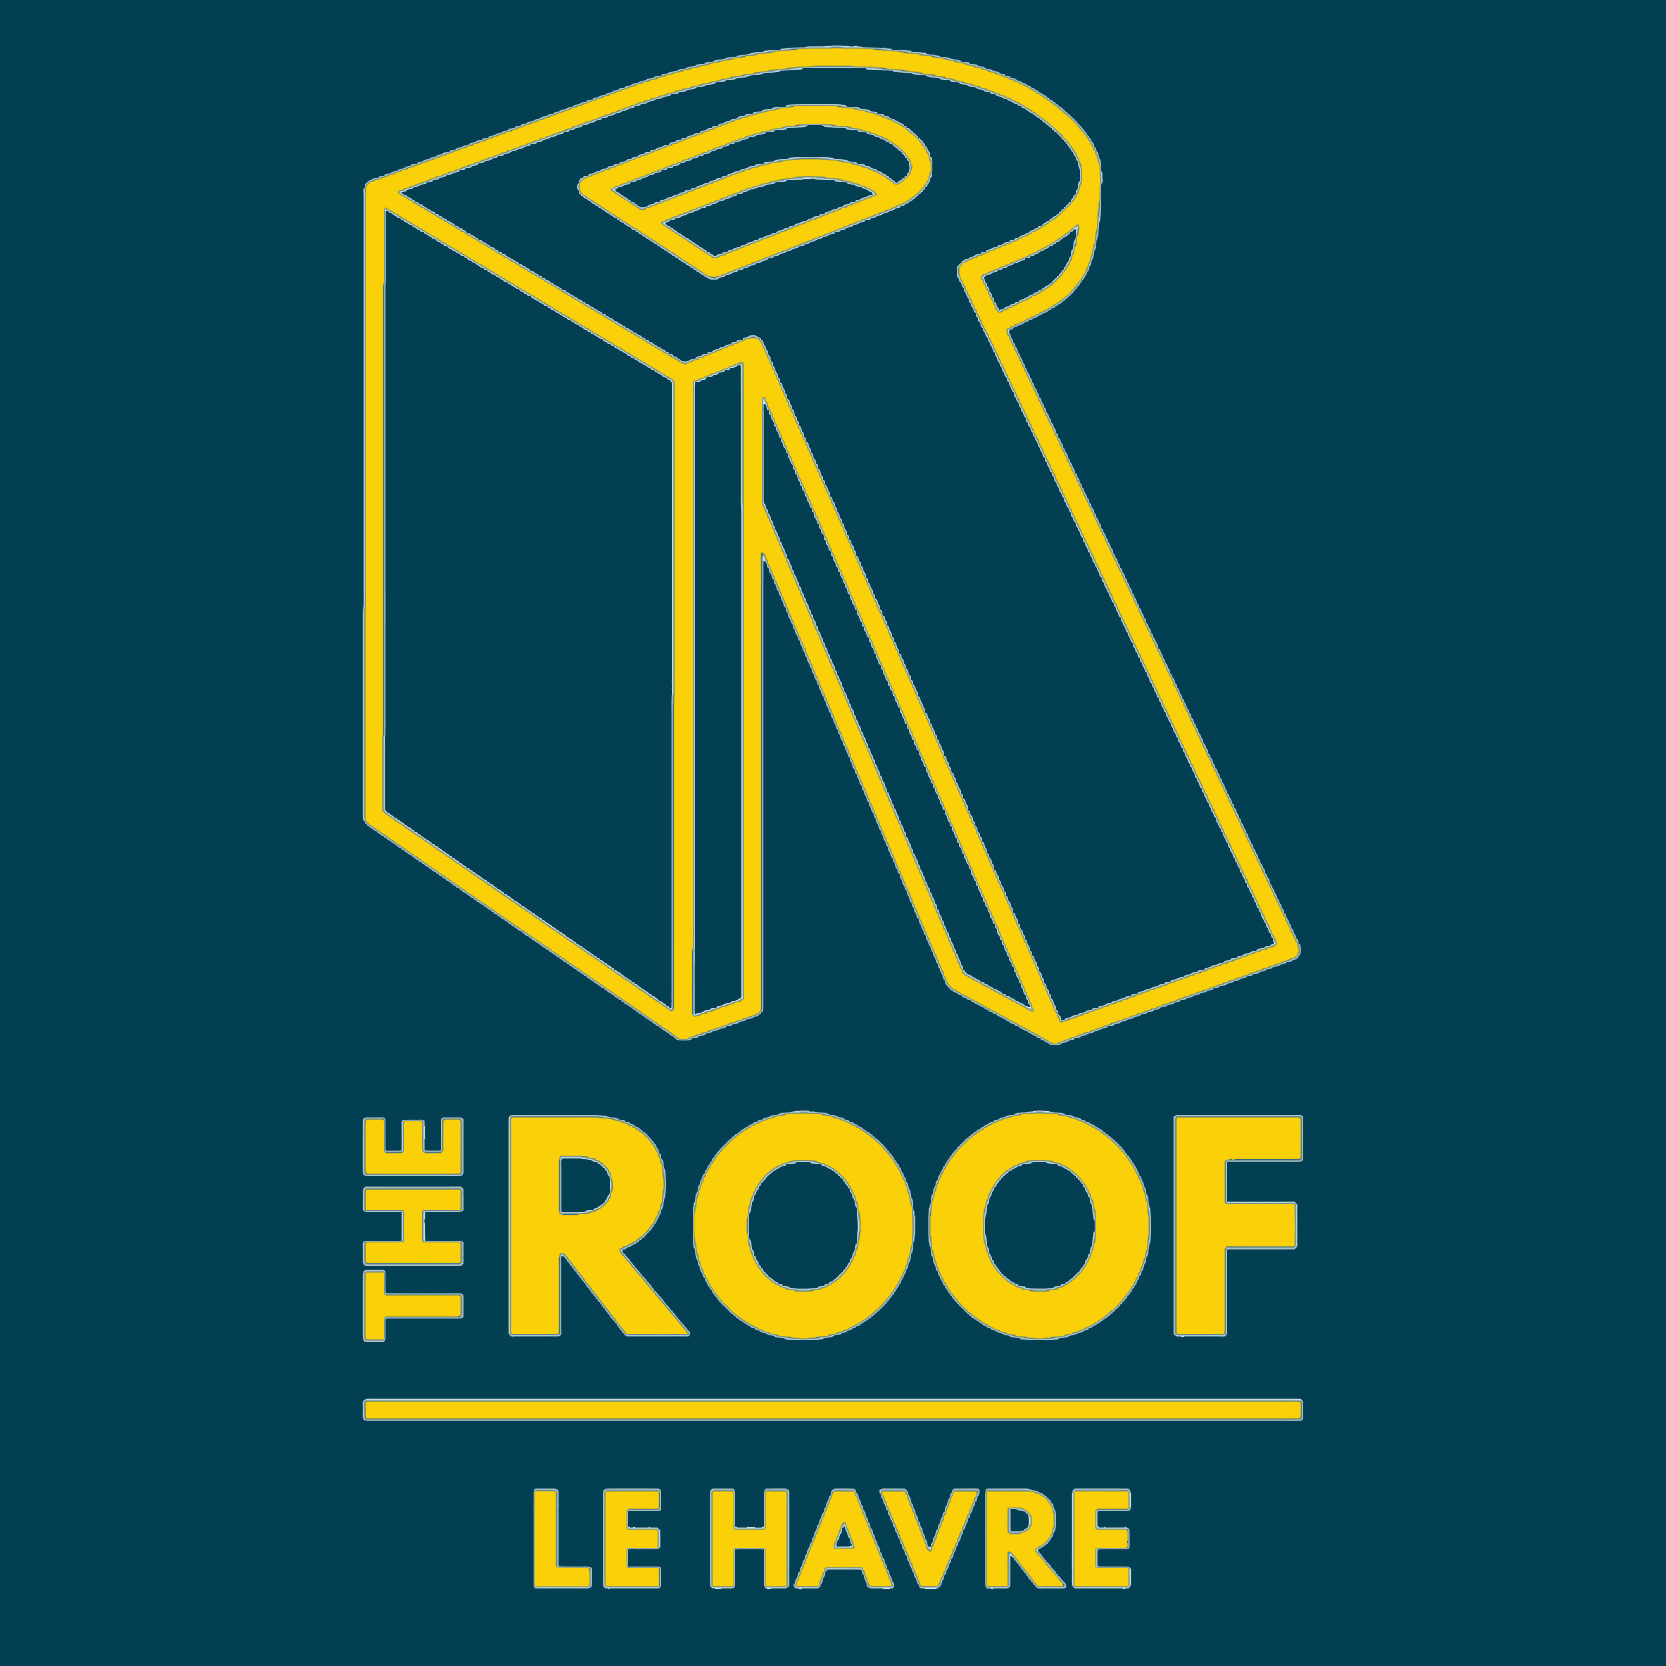 THE ROOF - LE HAVRE